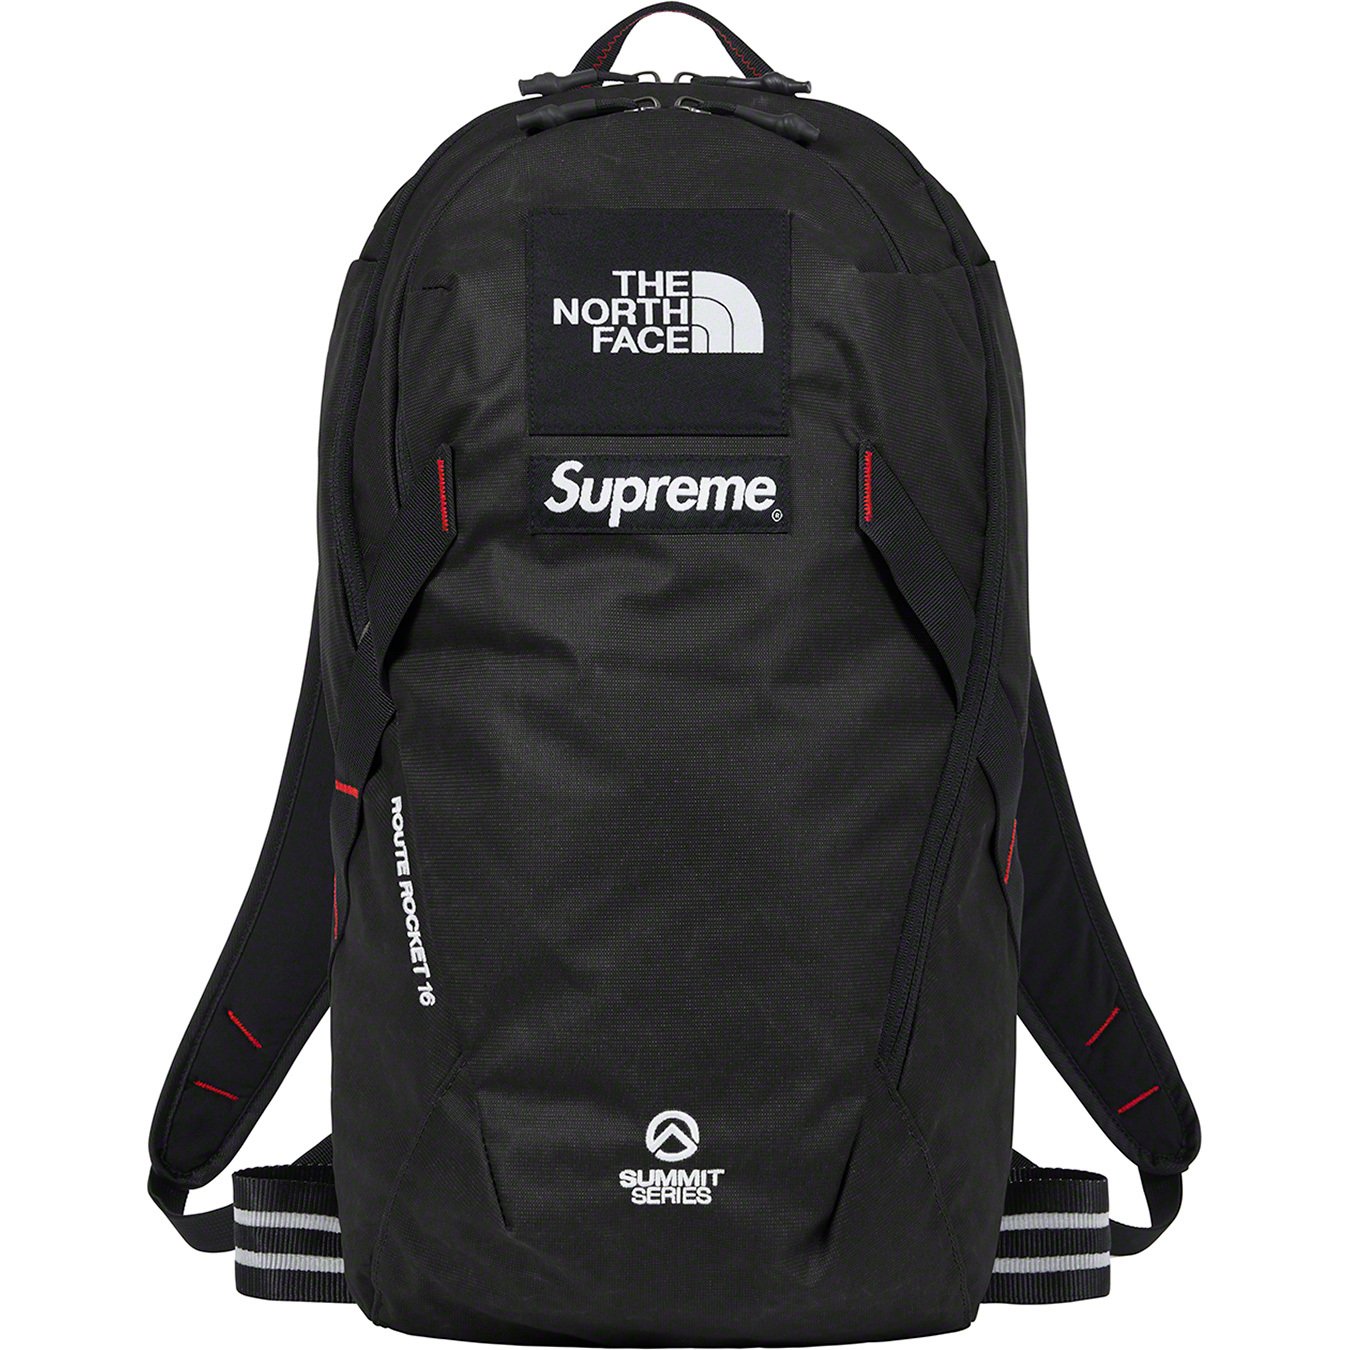 The North Face Summit Series Outer Tape Seam Route Rocket Backpack